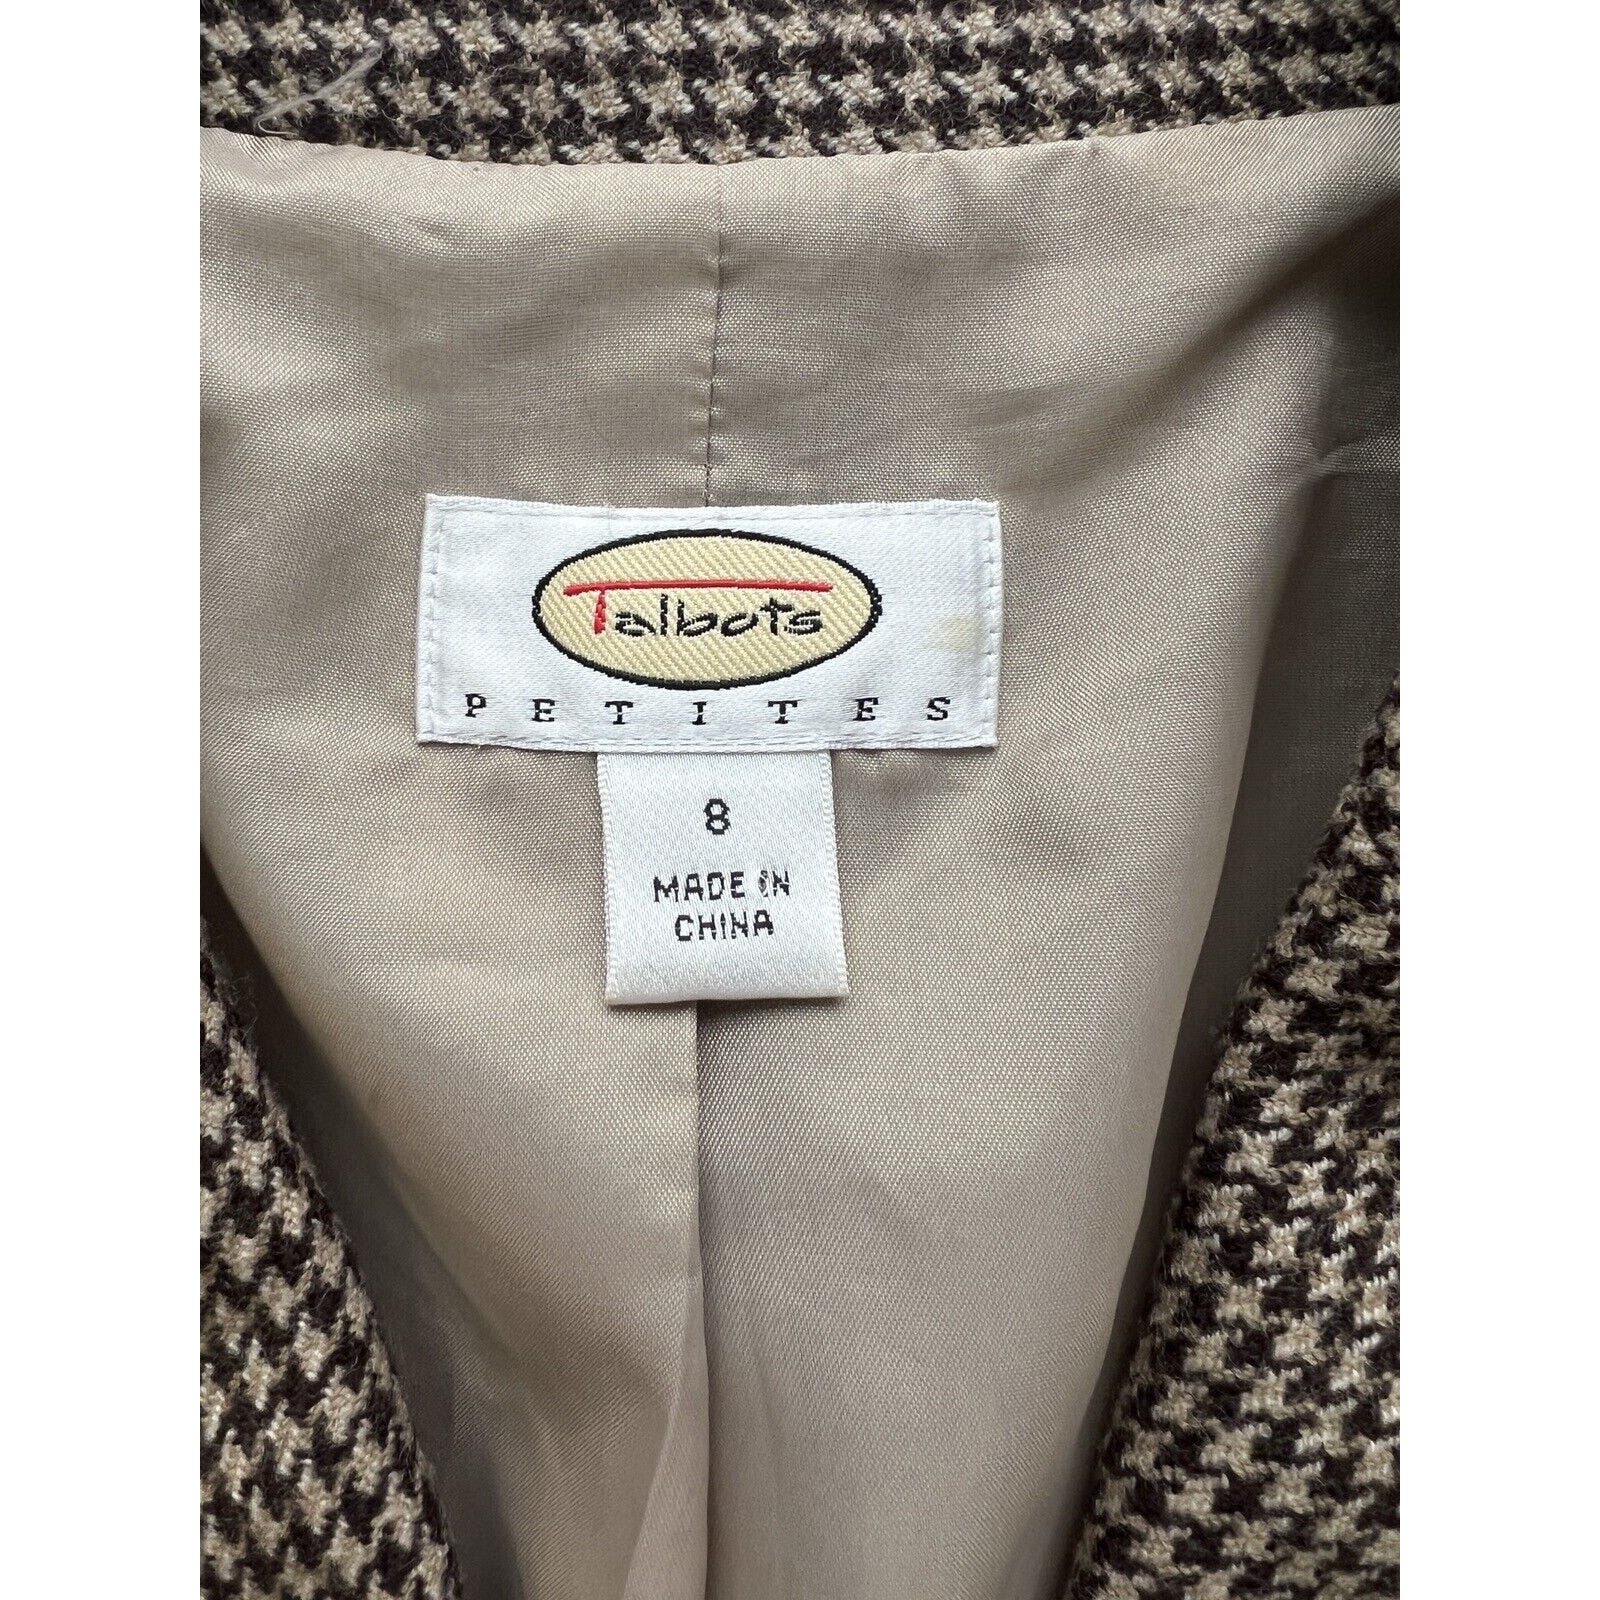 Talbots 3 Button Blazer Women’s Petite 8 Houndstooth Brown And Tan 100% Wool